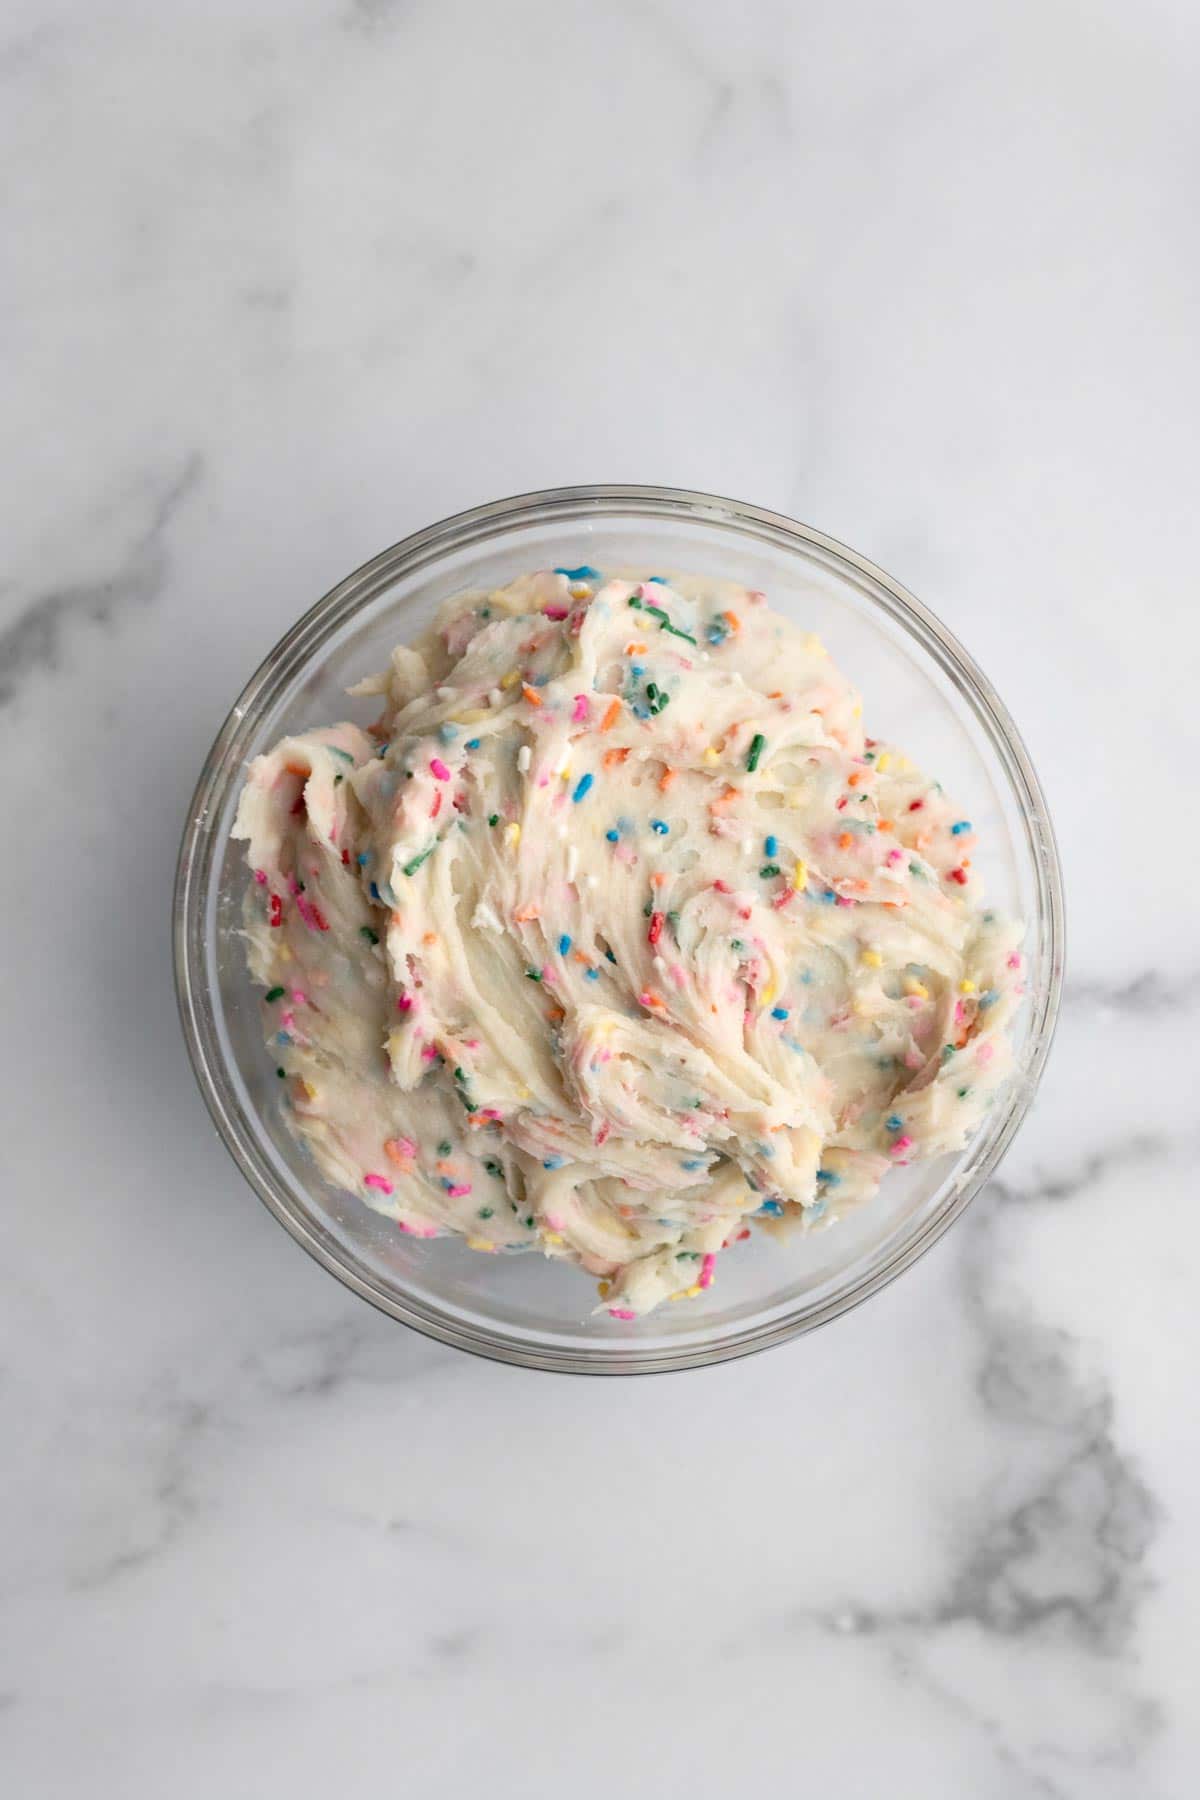 Sugar cookie batter with sprinkles mixed throughout.